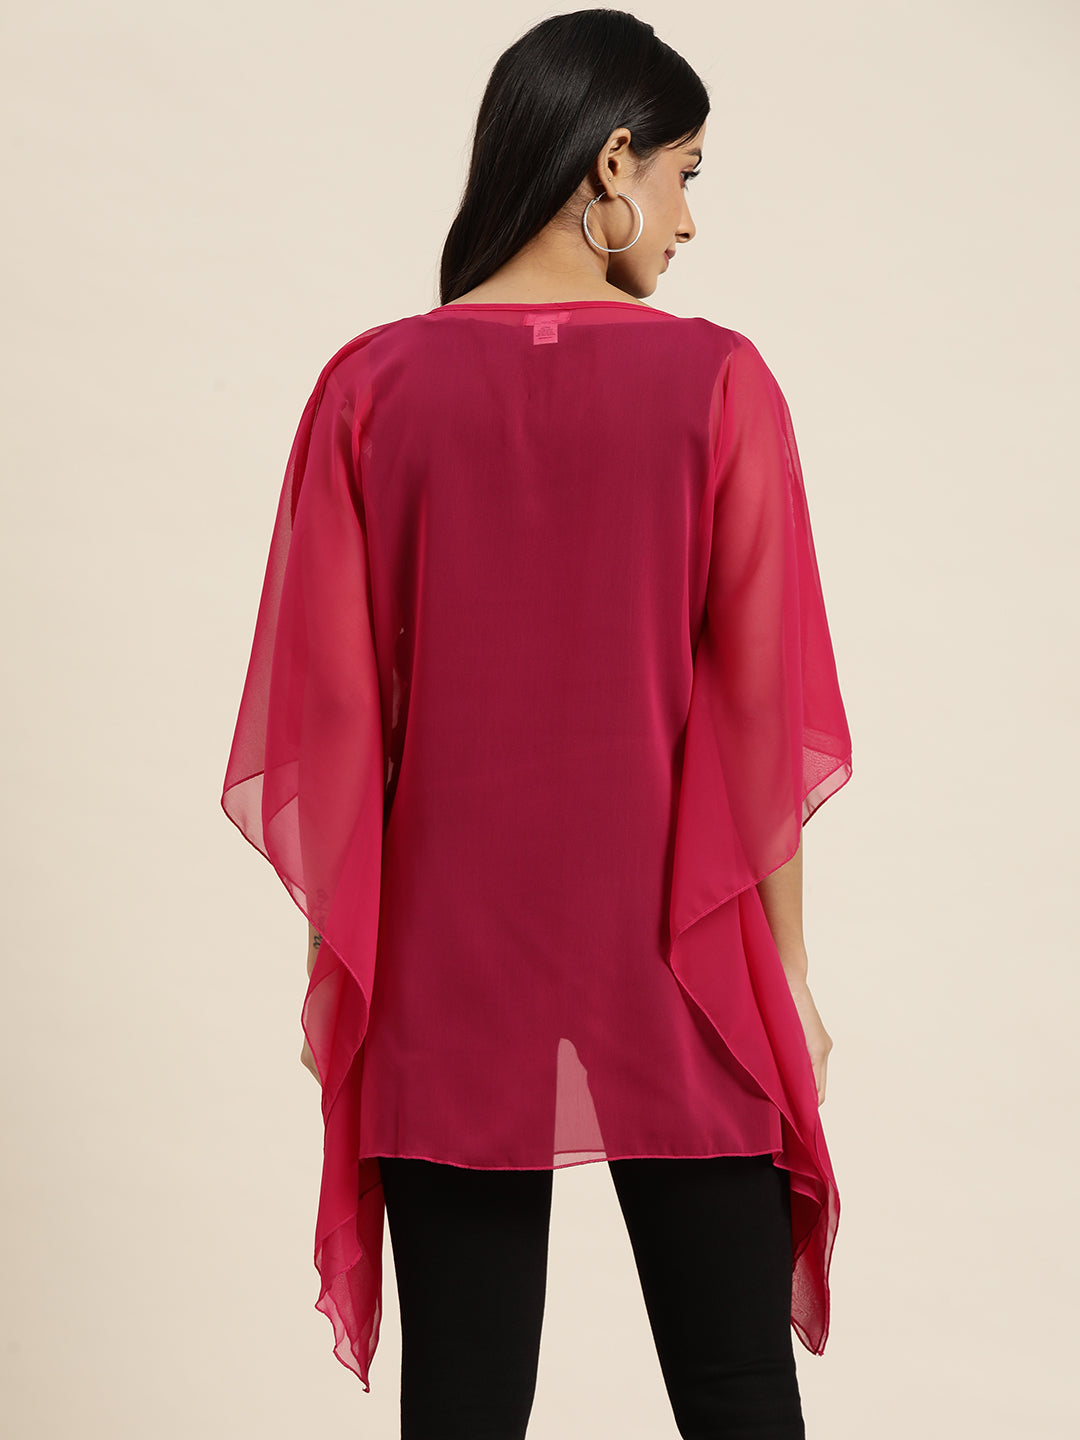 Solid Bright Magenta Loose Fit Boat Neck  Batwing Sleeve Georgette Poncho